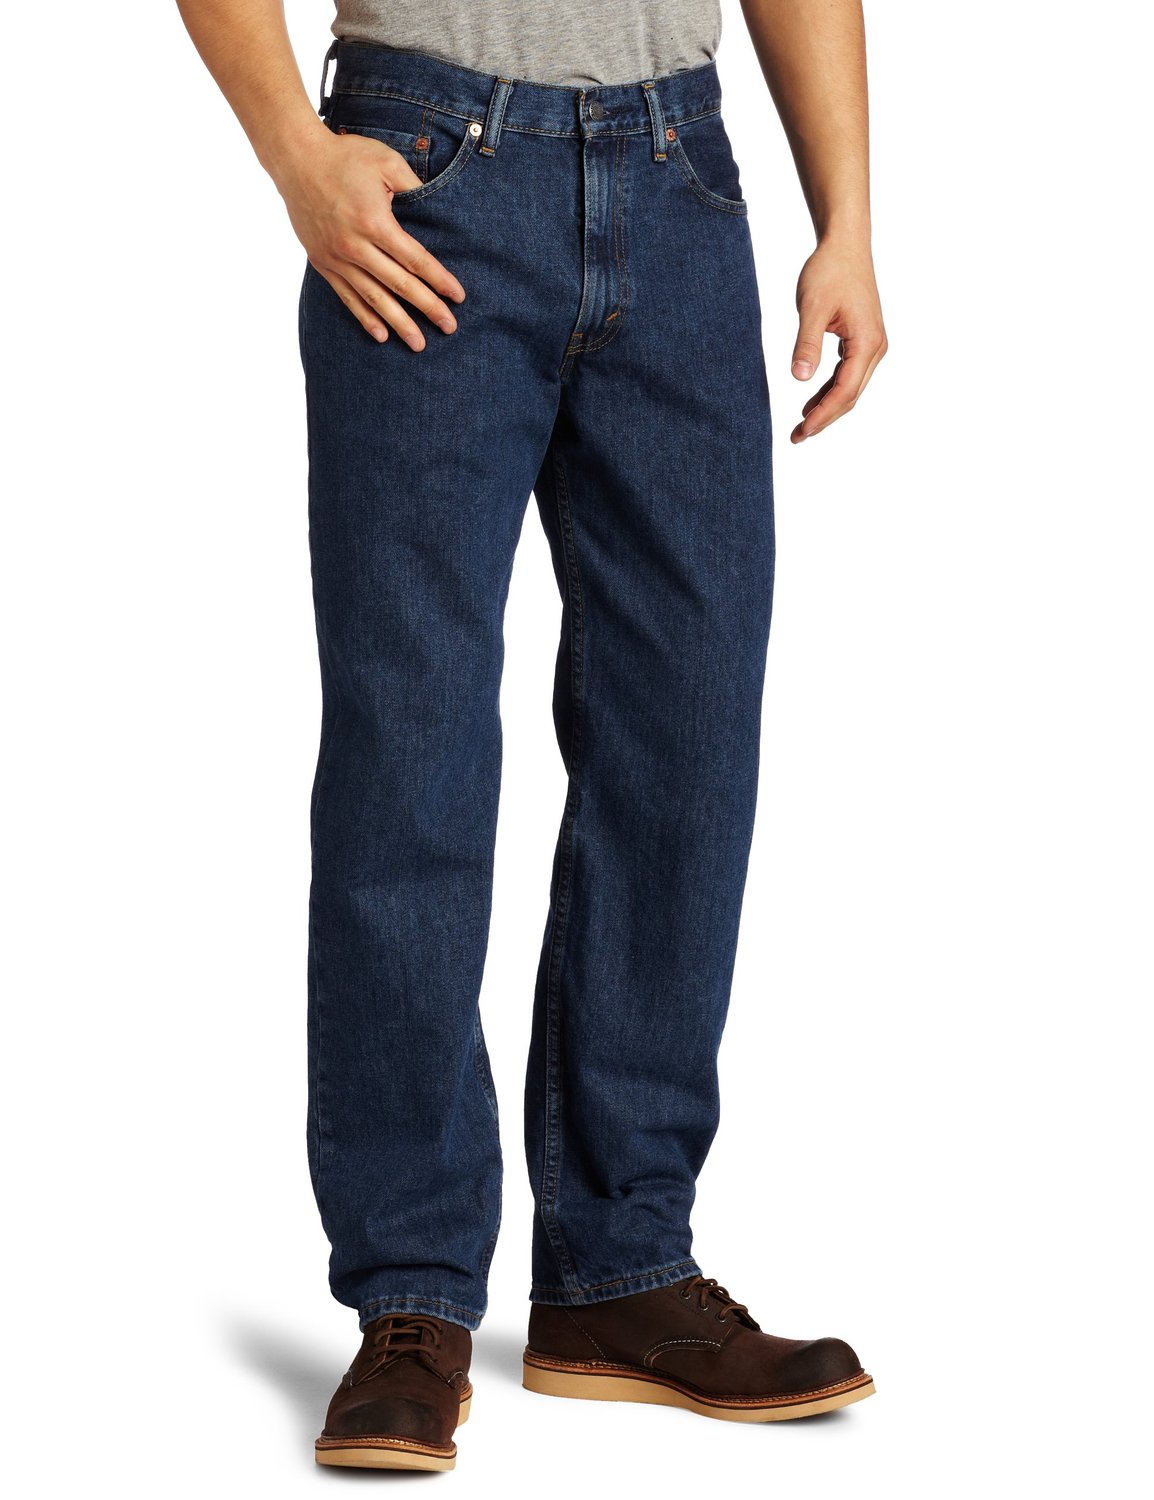 Levis Mens 550 Relaxed Fit Jean